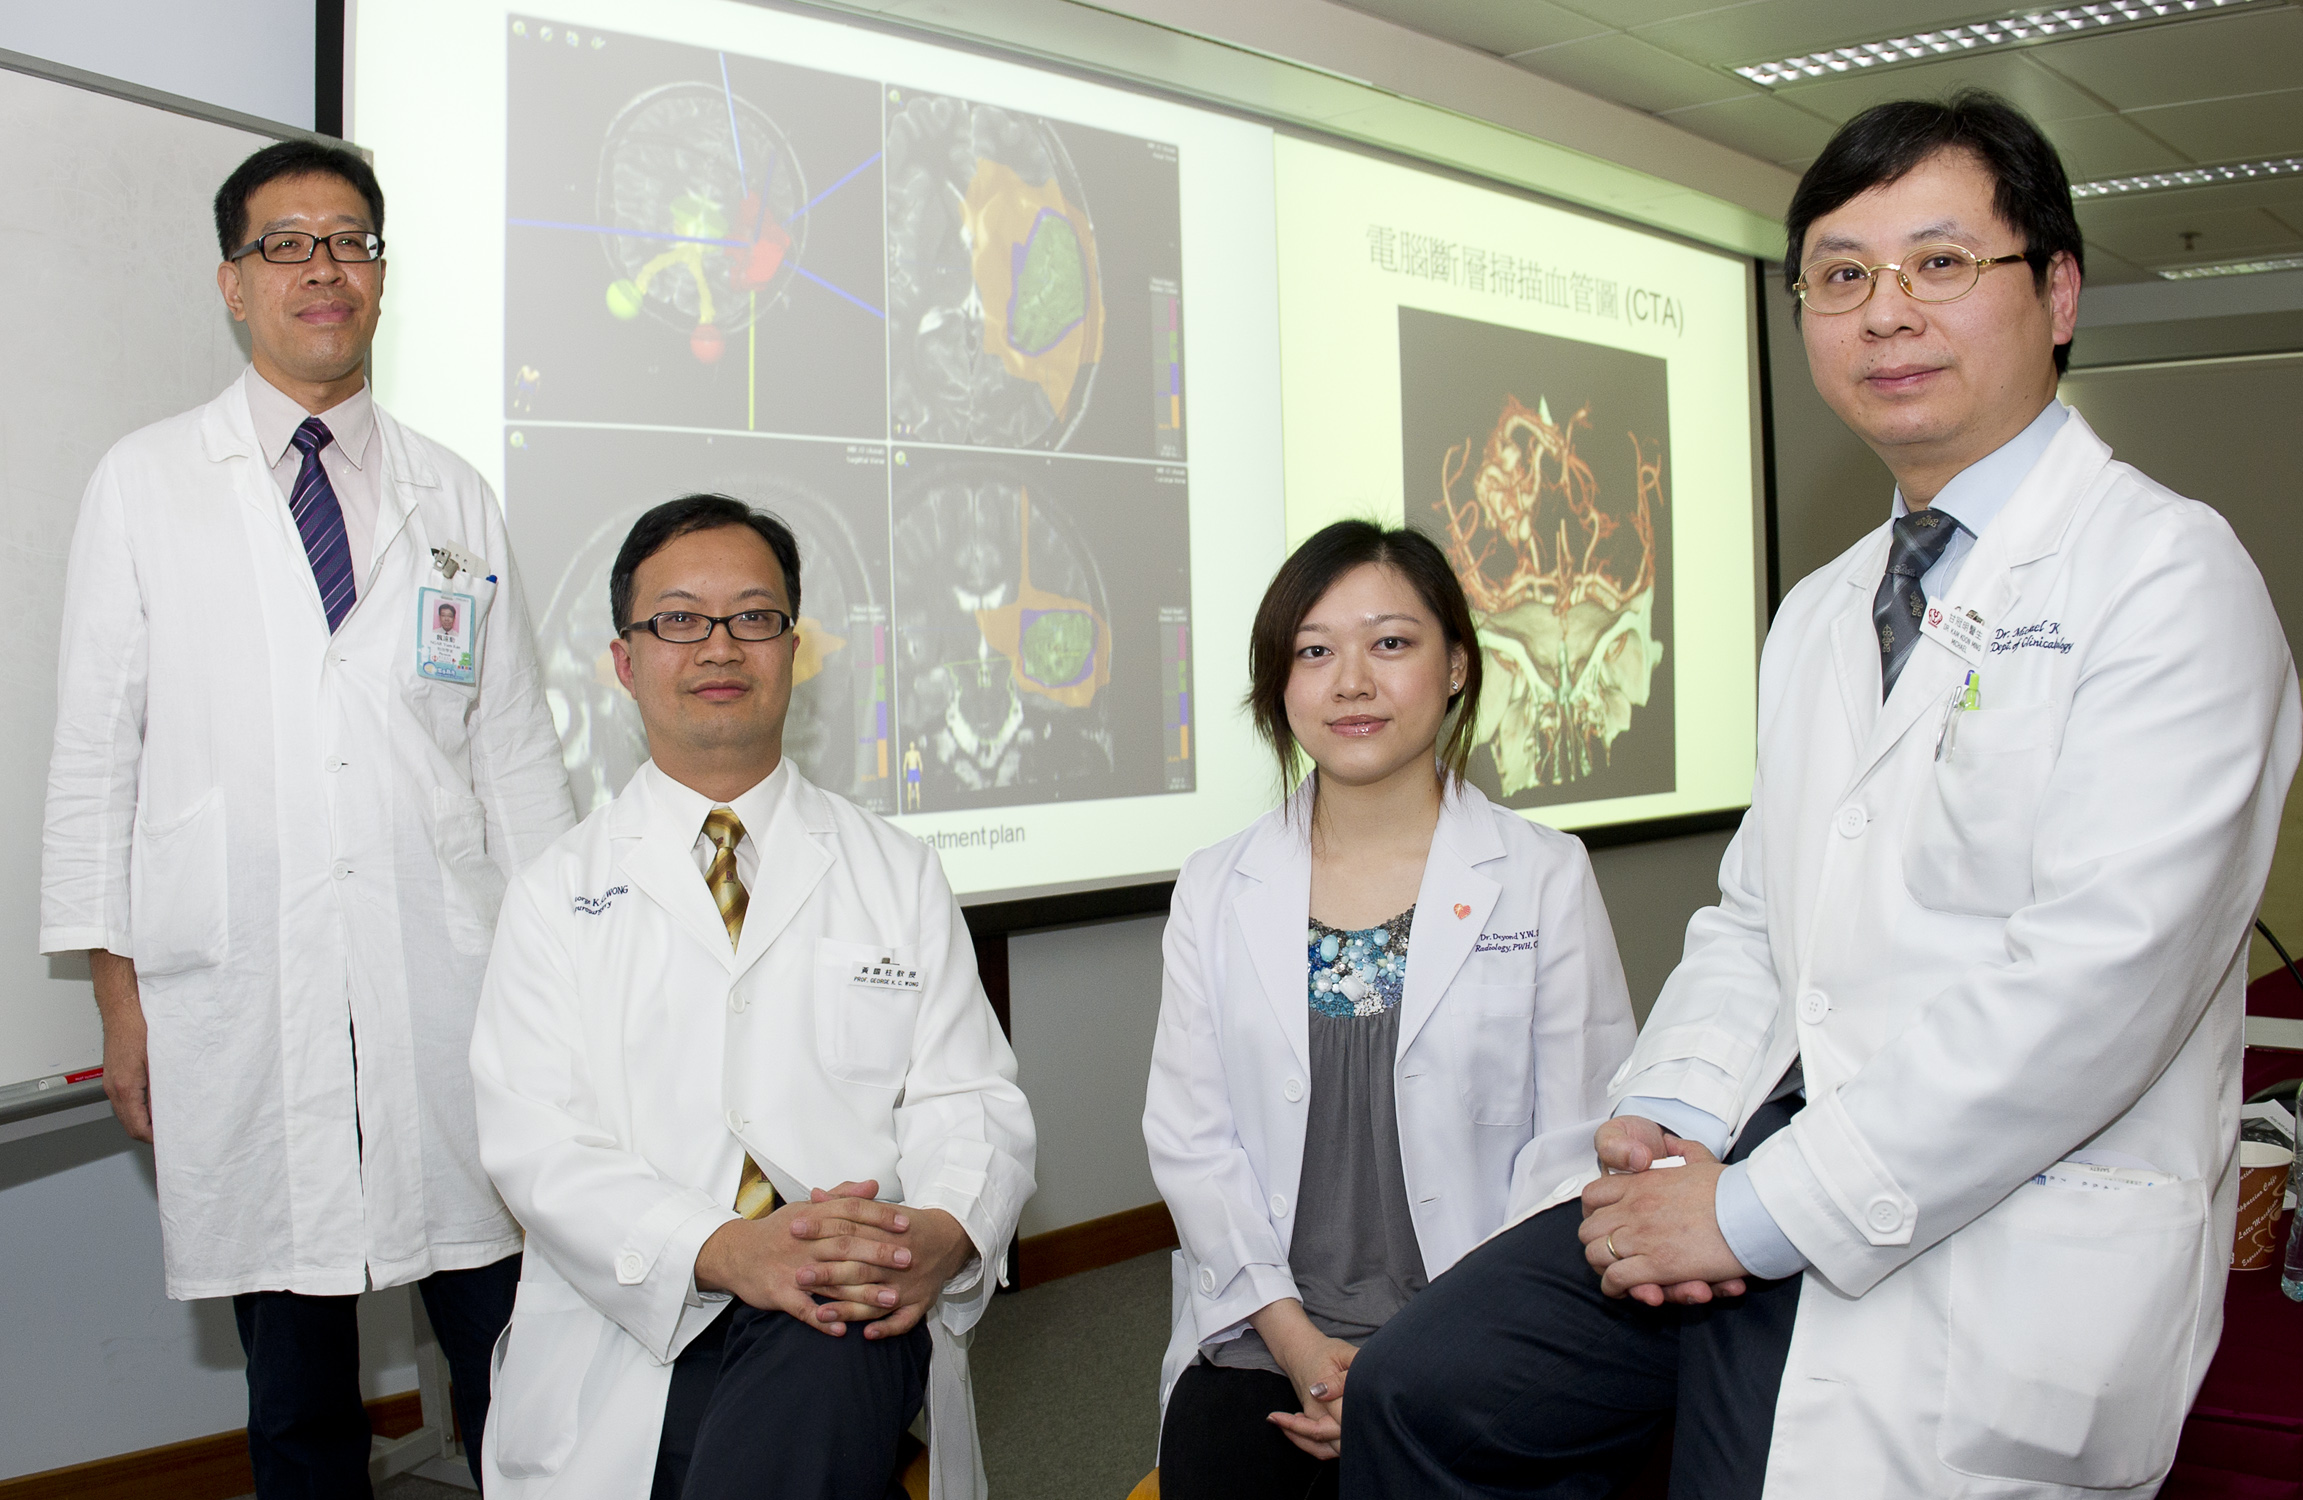 From Left: Mr Dennis Yuen Kan NGAR, Medical Physicist, Department of Clinical Oncology; Prof George Kwok Chu WONG, Professor, Division of Neurosurgery, Department of Surgery; Dr Deyond Yung Woon SIU, Clinical Assistant Professor (honorary), Department of Imaging and Interventional Radiology and Dr Michael Koon Ming KAM, Clinical Associate Professor (honorary), Department of Clinical Oncology